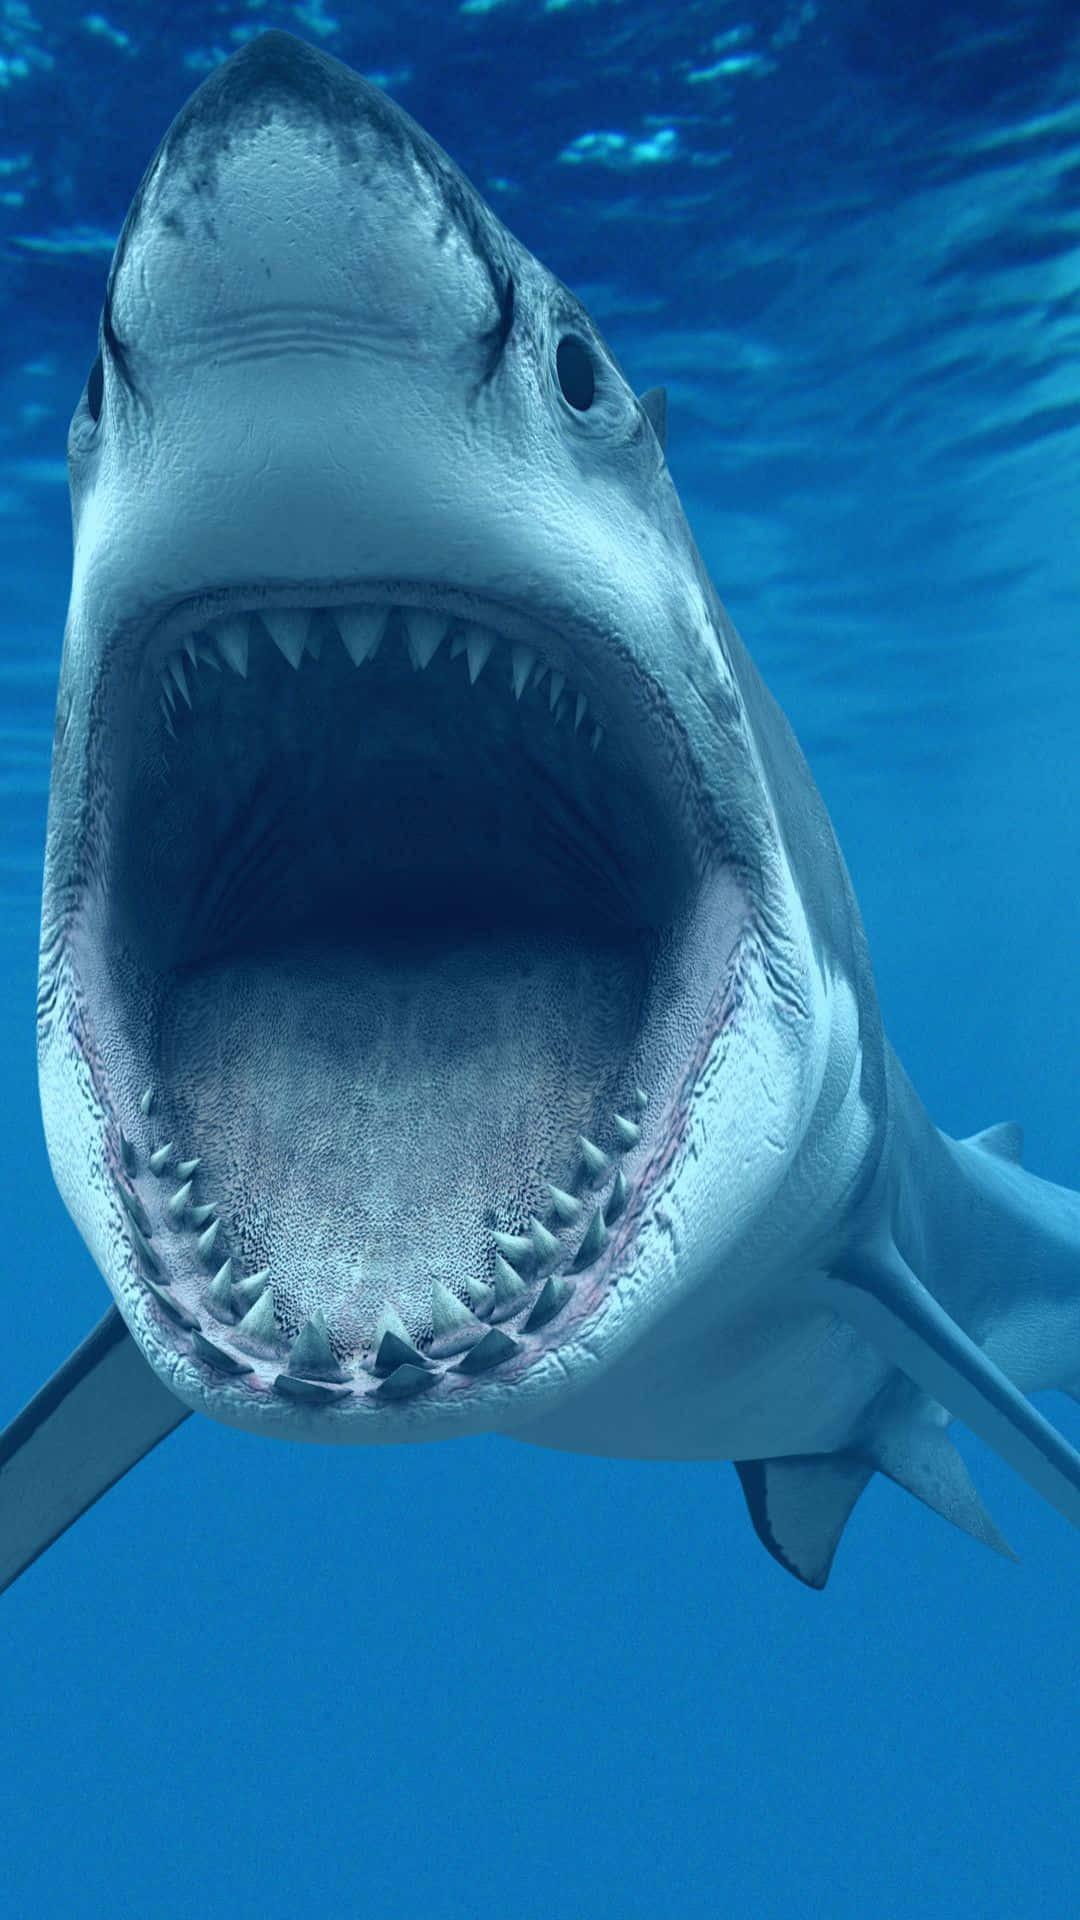 Get Ready for Shark Week with the Shark Iphone Wallpaper